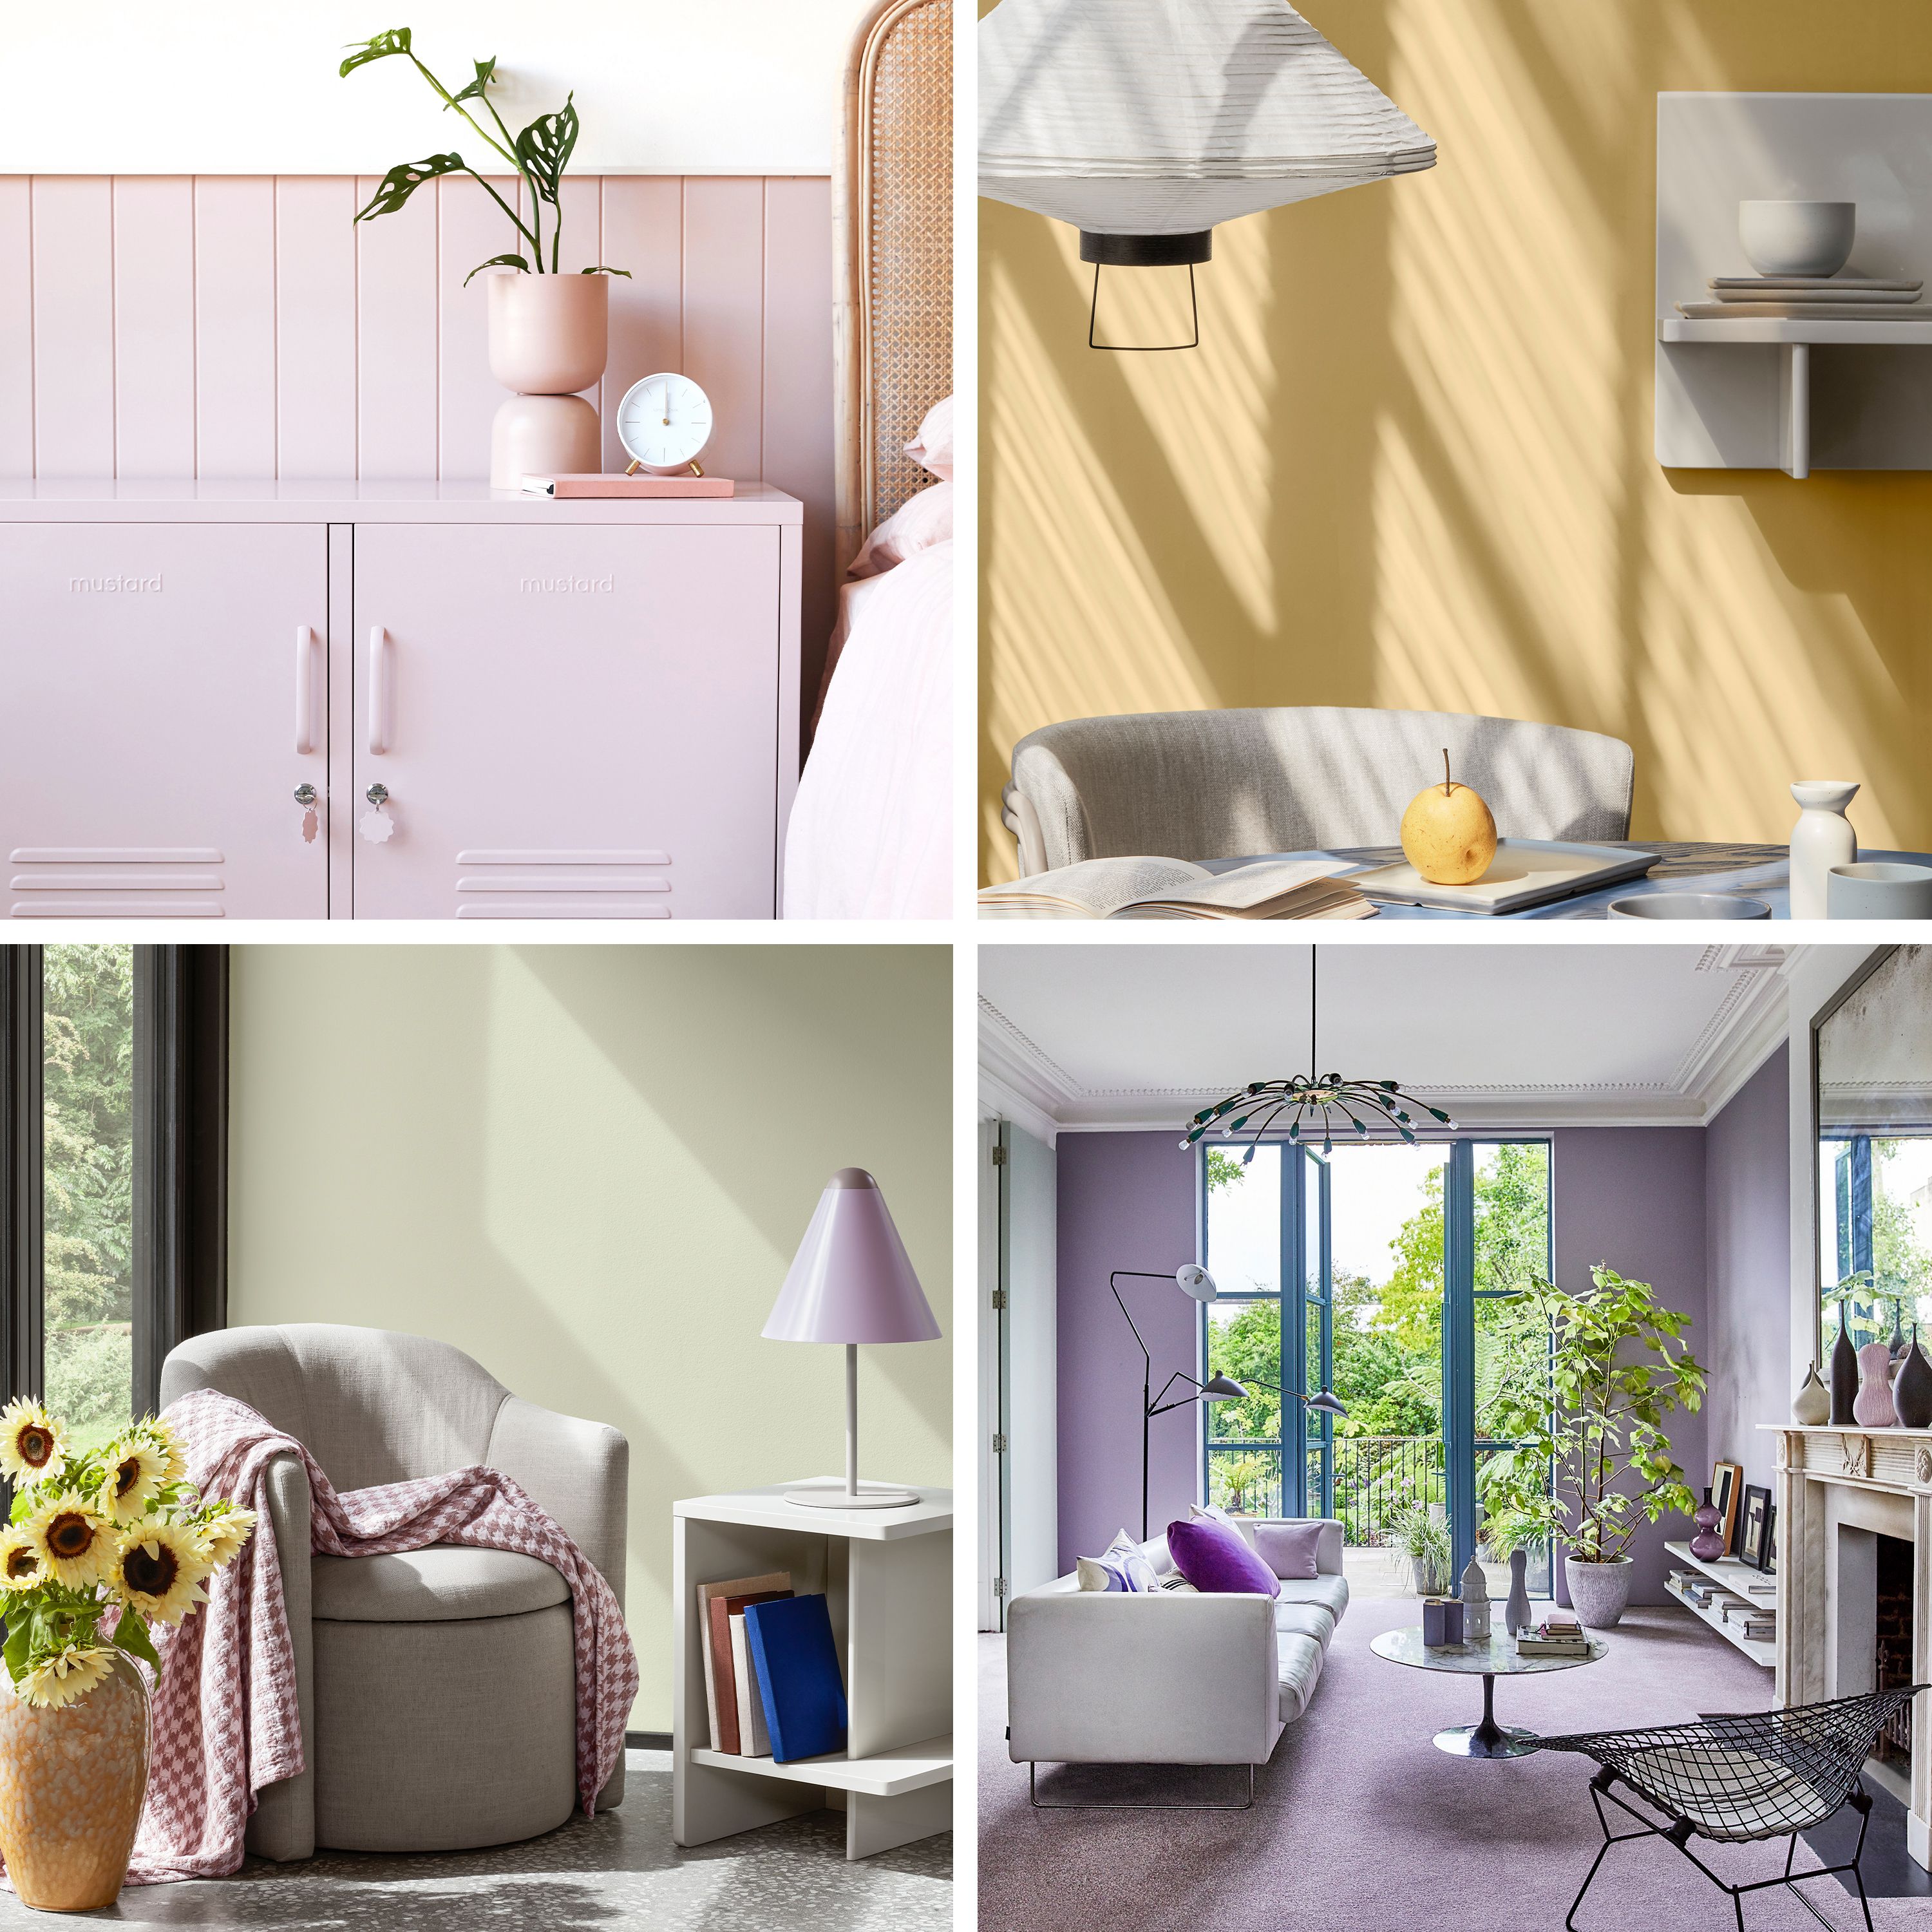 Pastel Aesthetic: 21 Pastel Colour Decorating Ideas For The Home